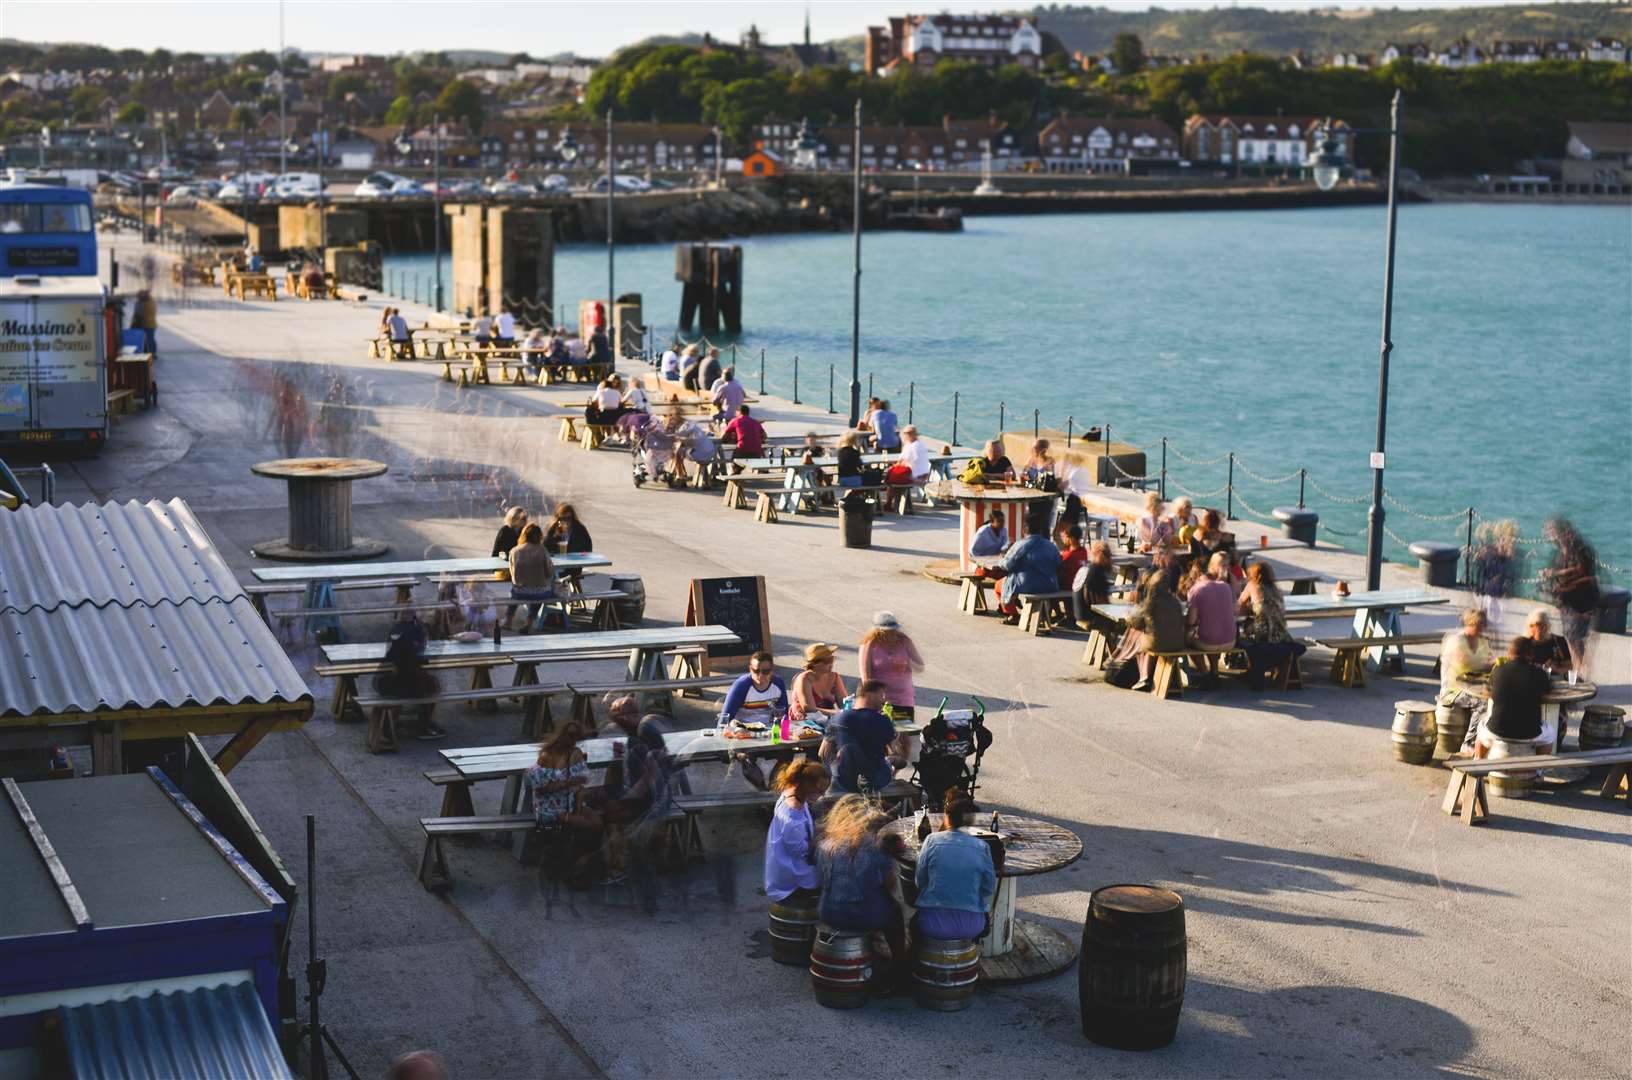 The seaside spot has become popular with locals and visitors alike. Picture: Folkestone Harbour Arm